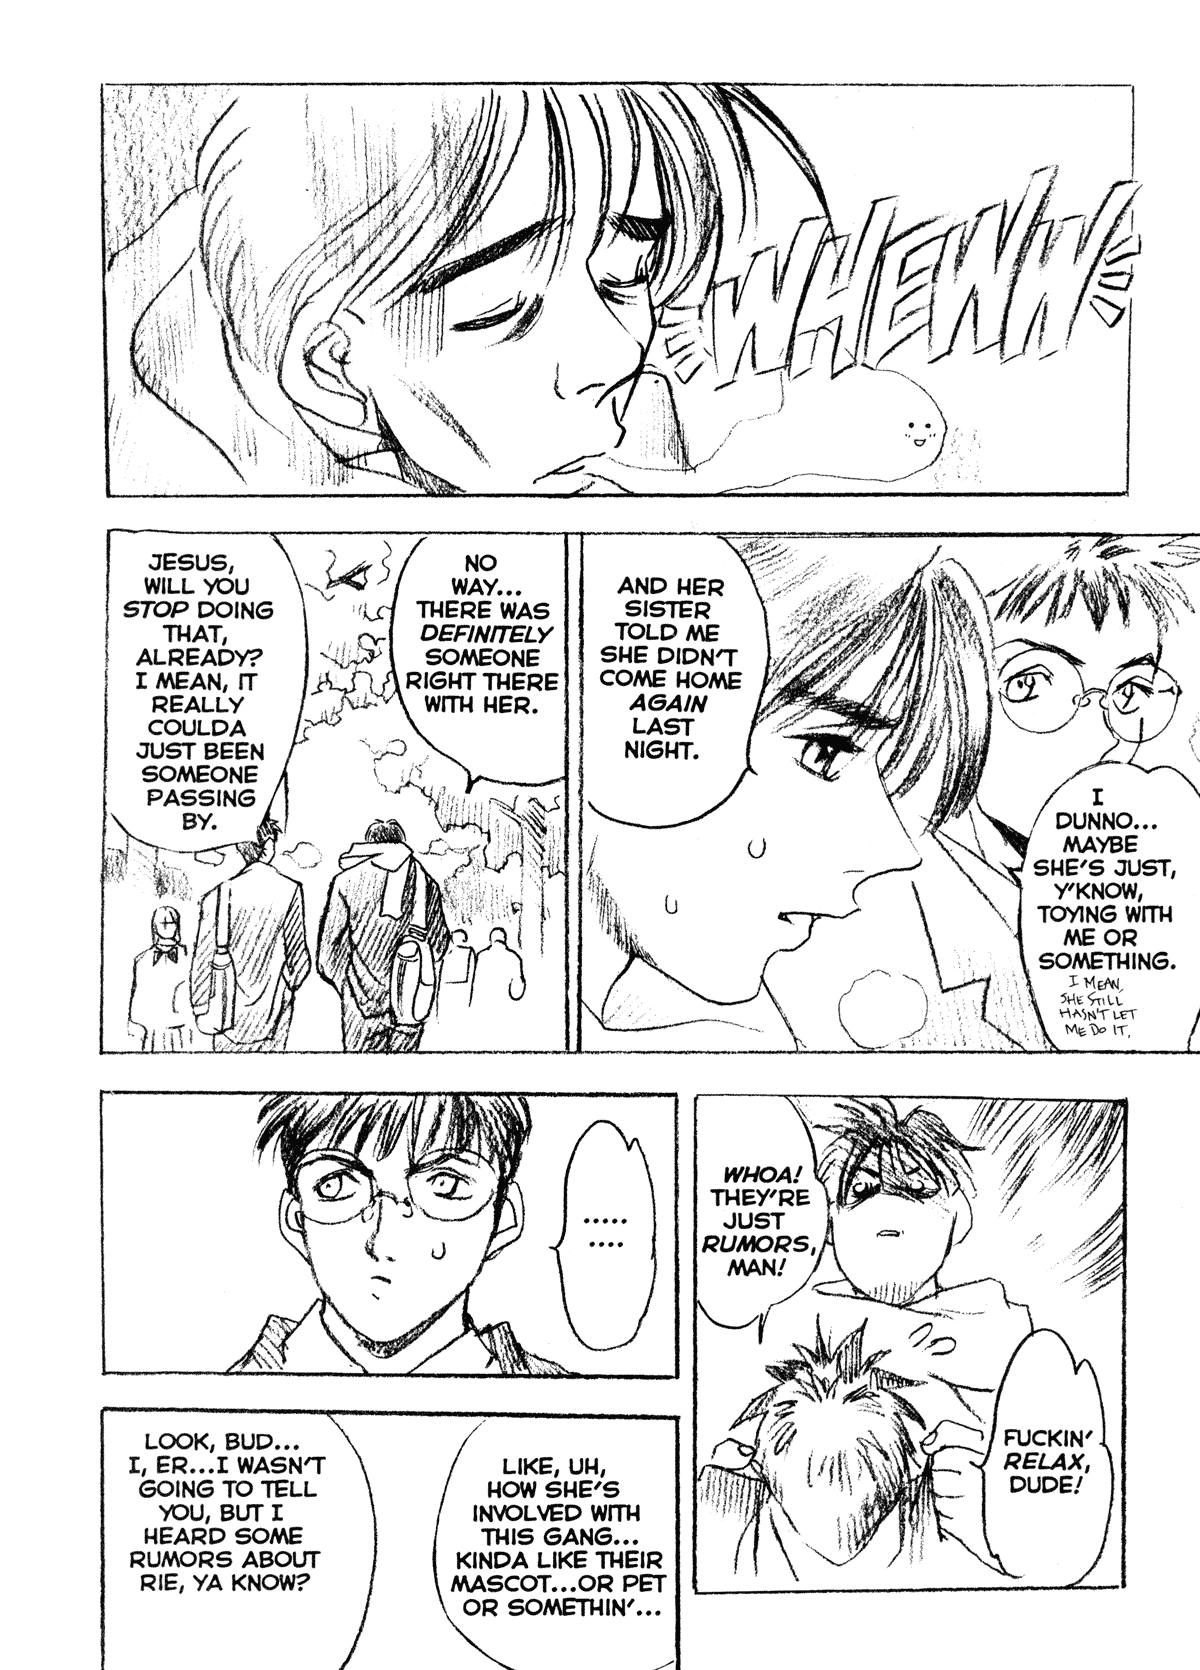 [Oh! Great] Silky Whip 11 [English] 